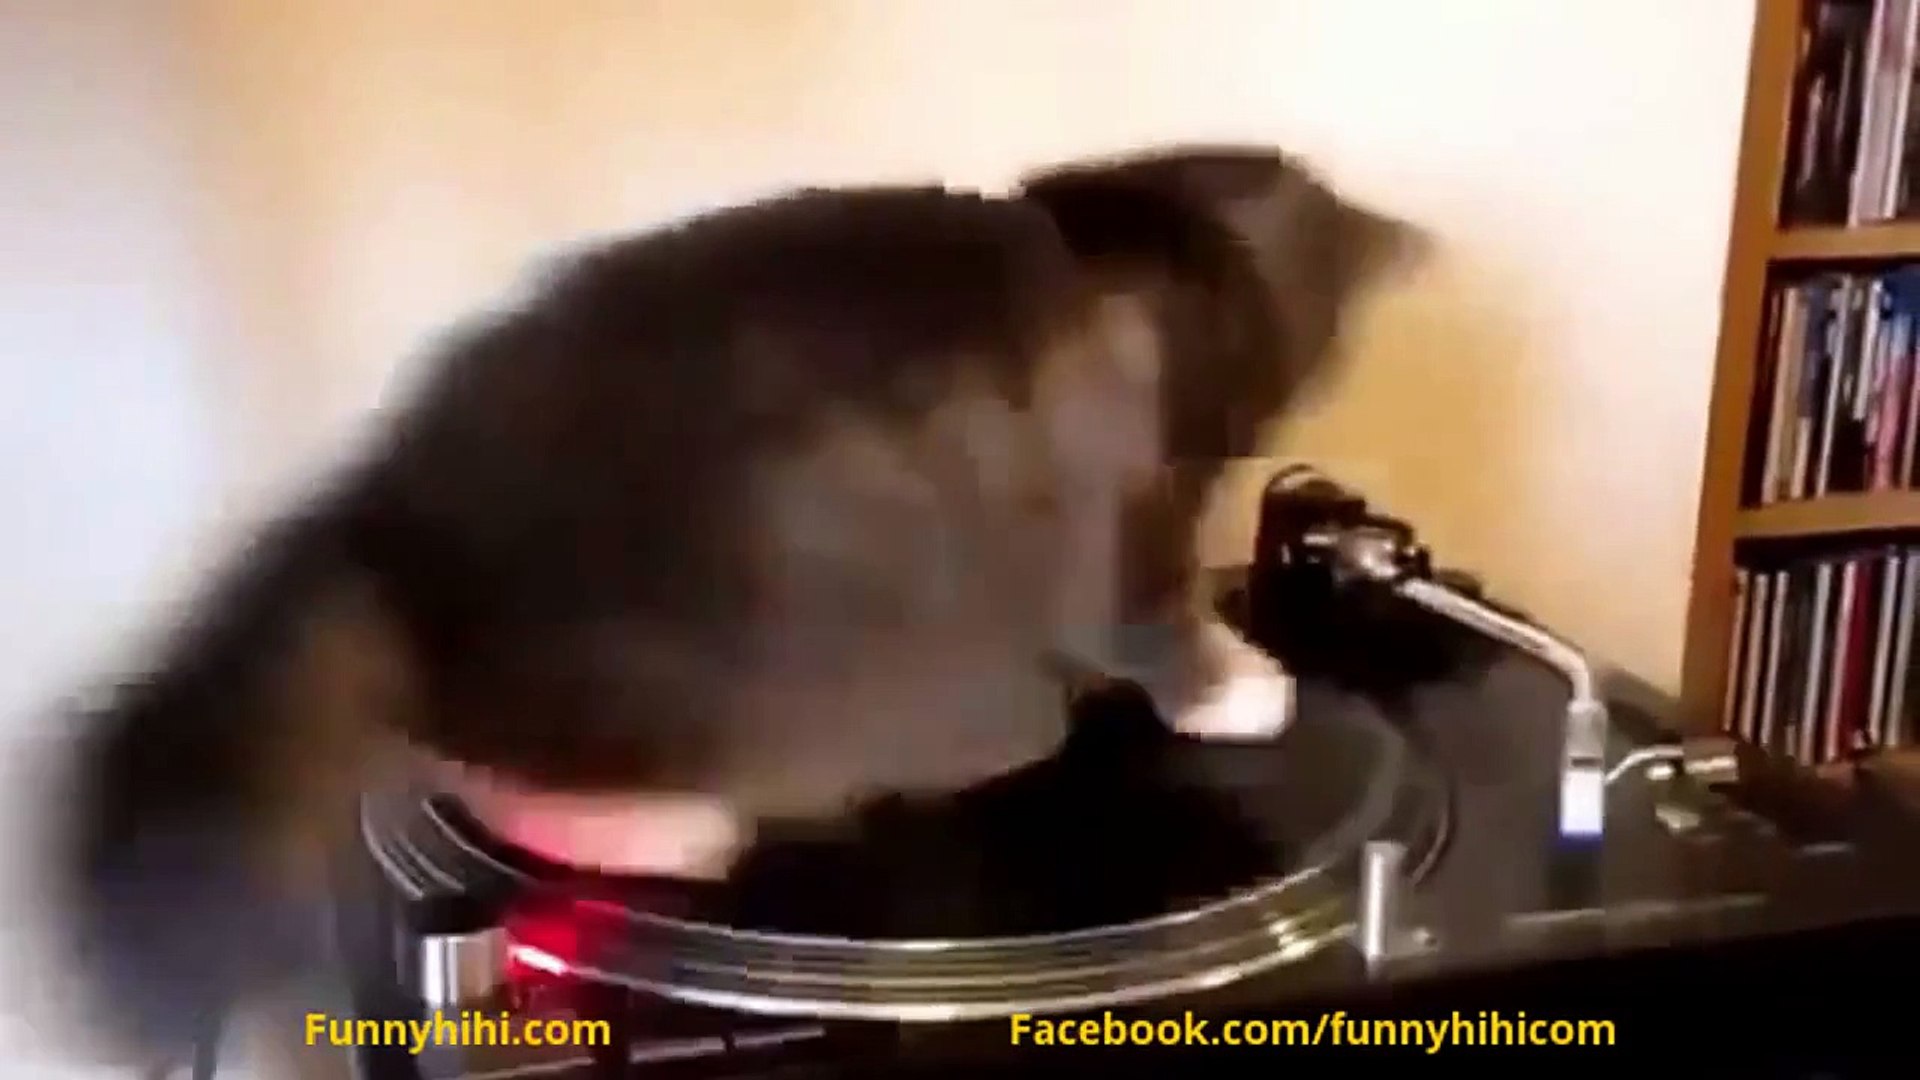 Funny Cats Funny Cat Videos 2015 Funny Animals Videos Funny Cat compilations